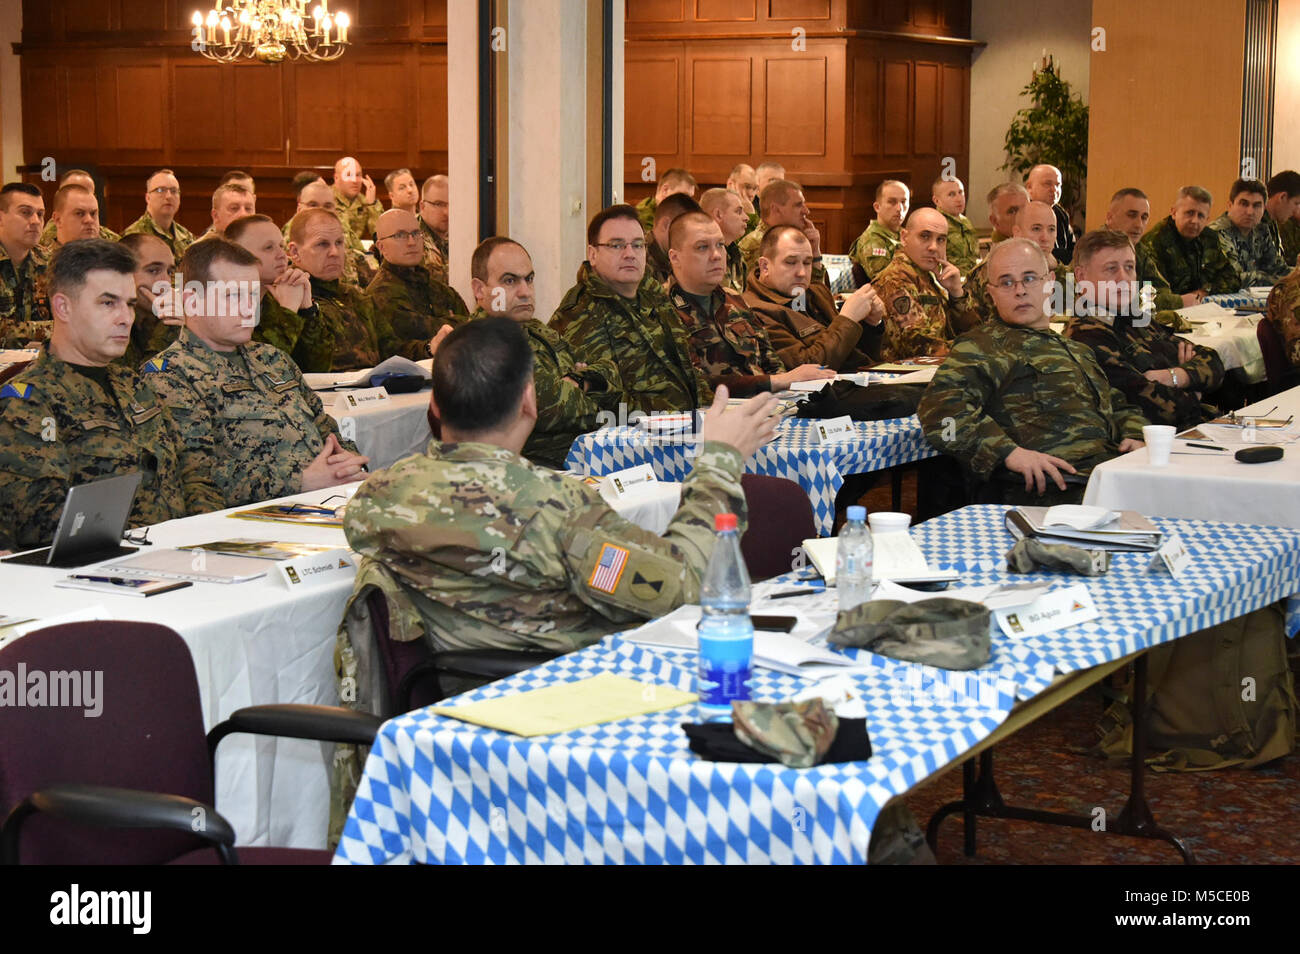 The 7th Army Training Command hosts the Conference of European Training Centers at the Tower View Conference Center on Grafenwoehr, Germany, Feb. 14, 2018. The event provides space and time for allied representatives to share lessons learned and develop a common operating picture to facilitate increased interoperability across the alliance. (U.S. Army Stock Photo